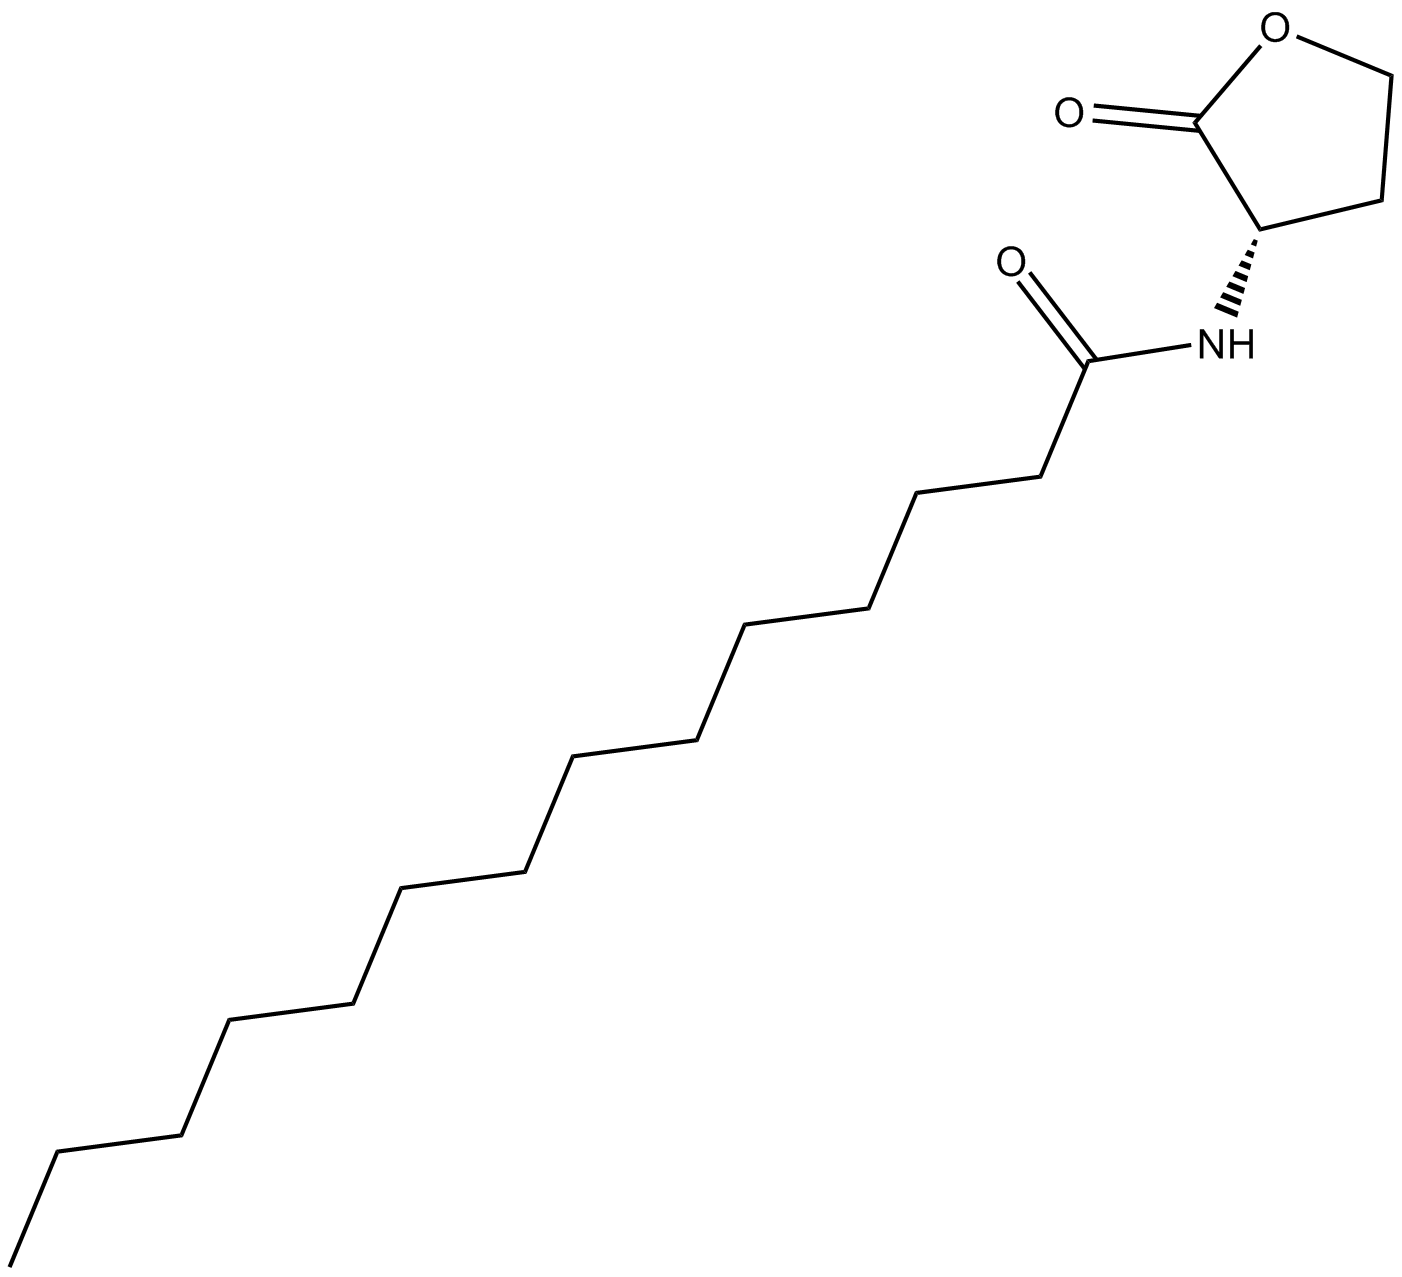 N-tetradecanoyl-L-Homoserine lactone  Chemical Structure